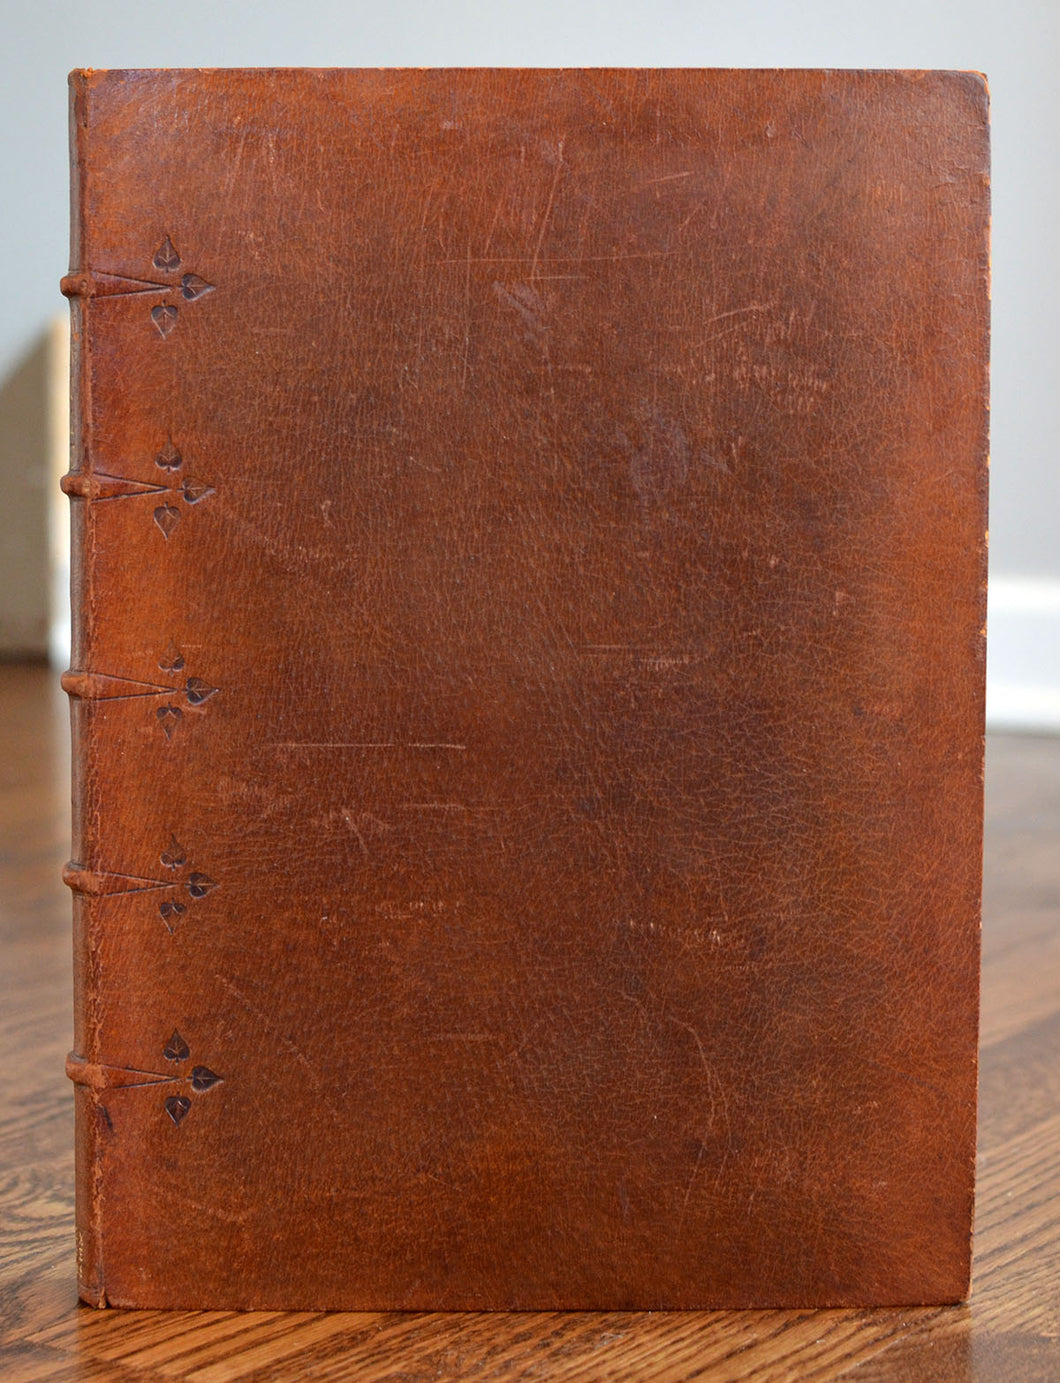 [Fine Binding | Guild of Handicraft] The Treatises on Goldsmithing and Sculpture